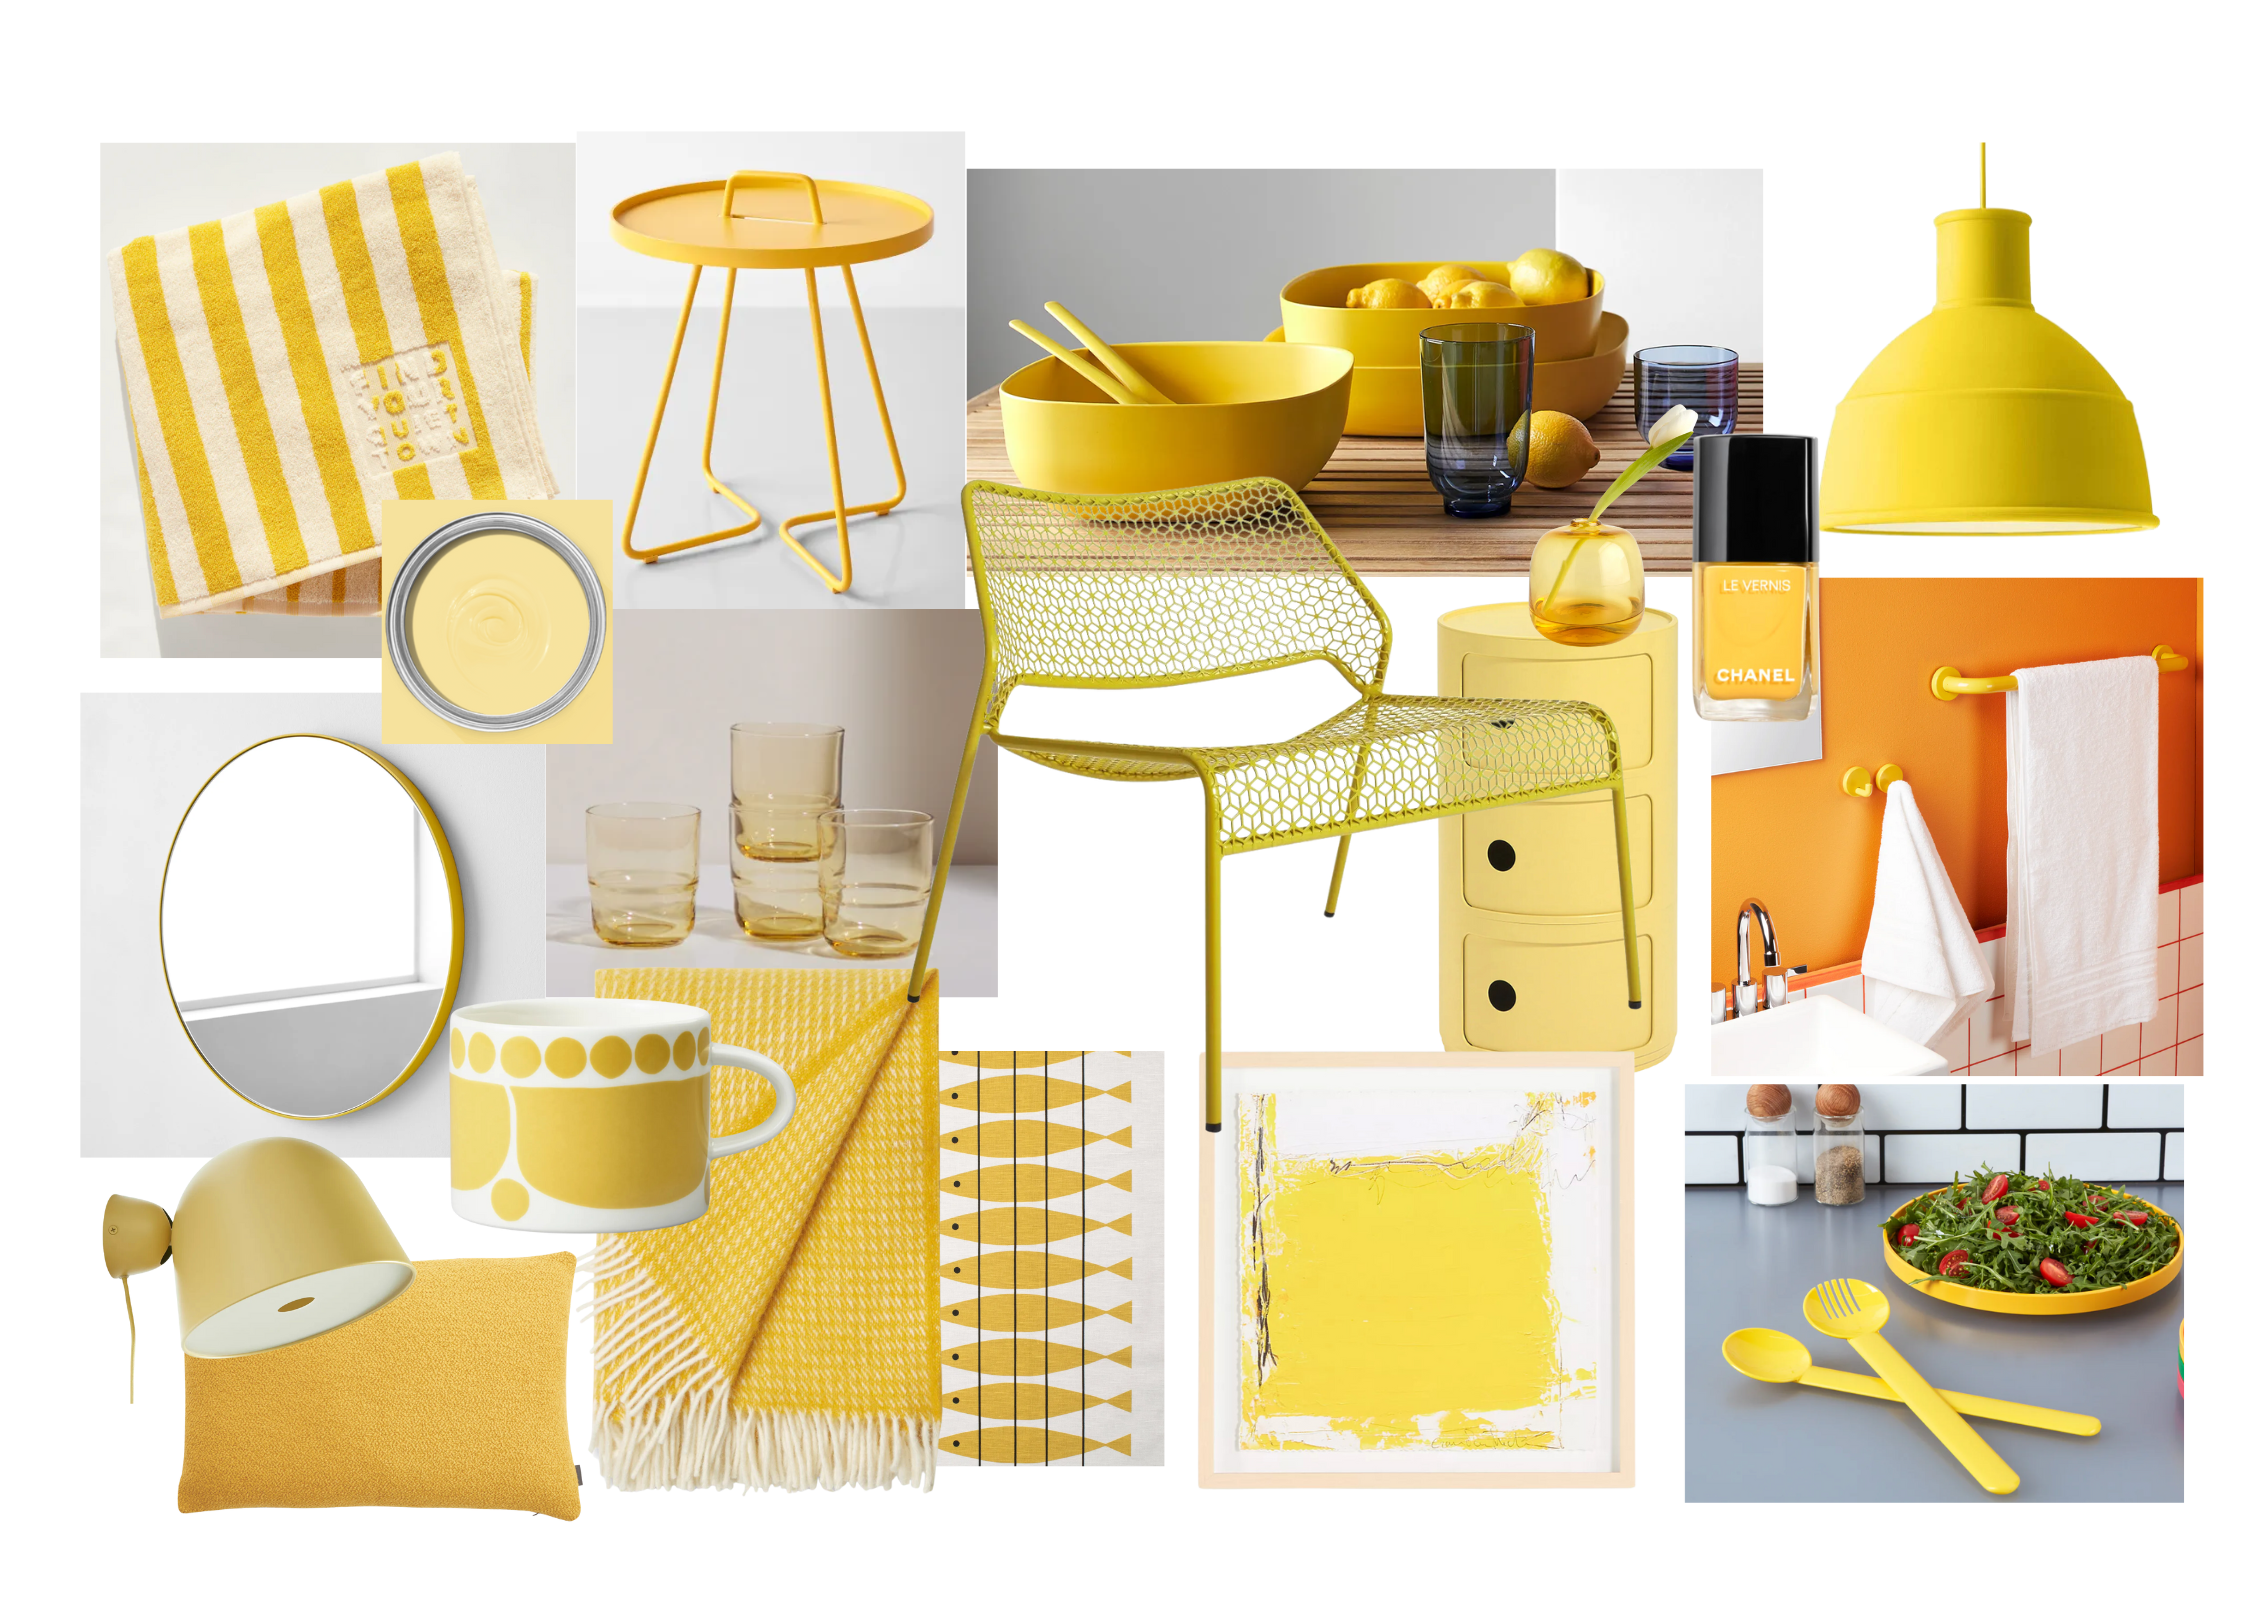 More than fifteen different yellow interior design selections to bring color and happiness into any space.